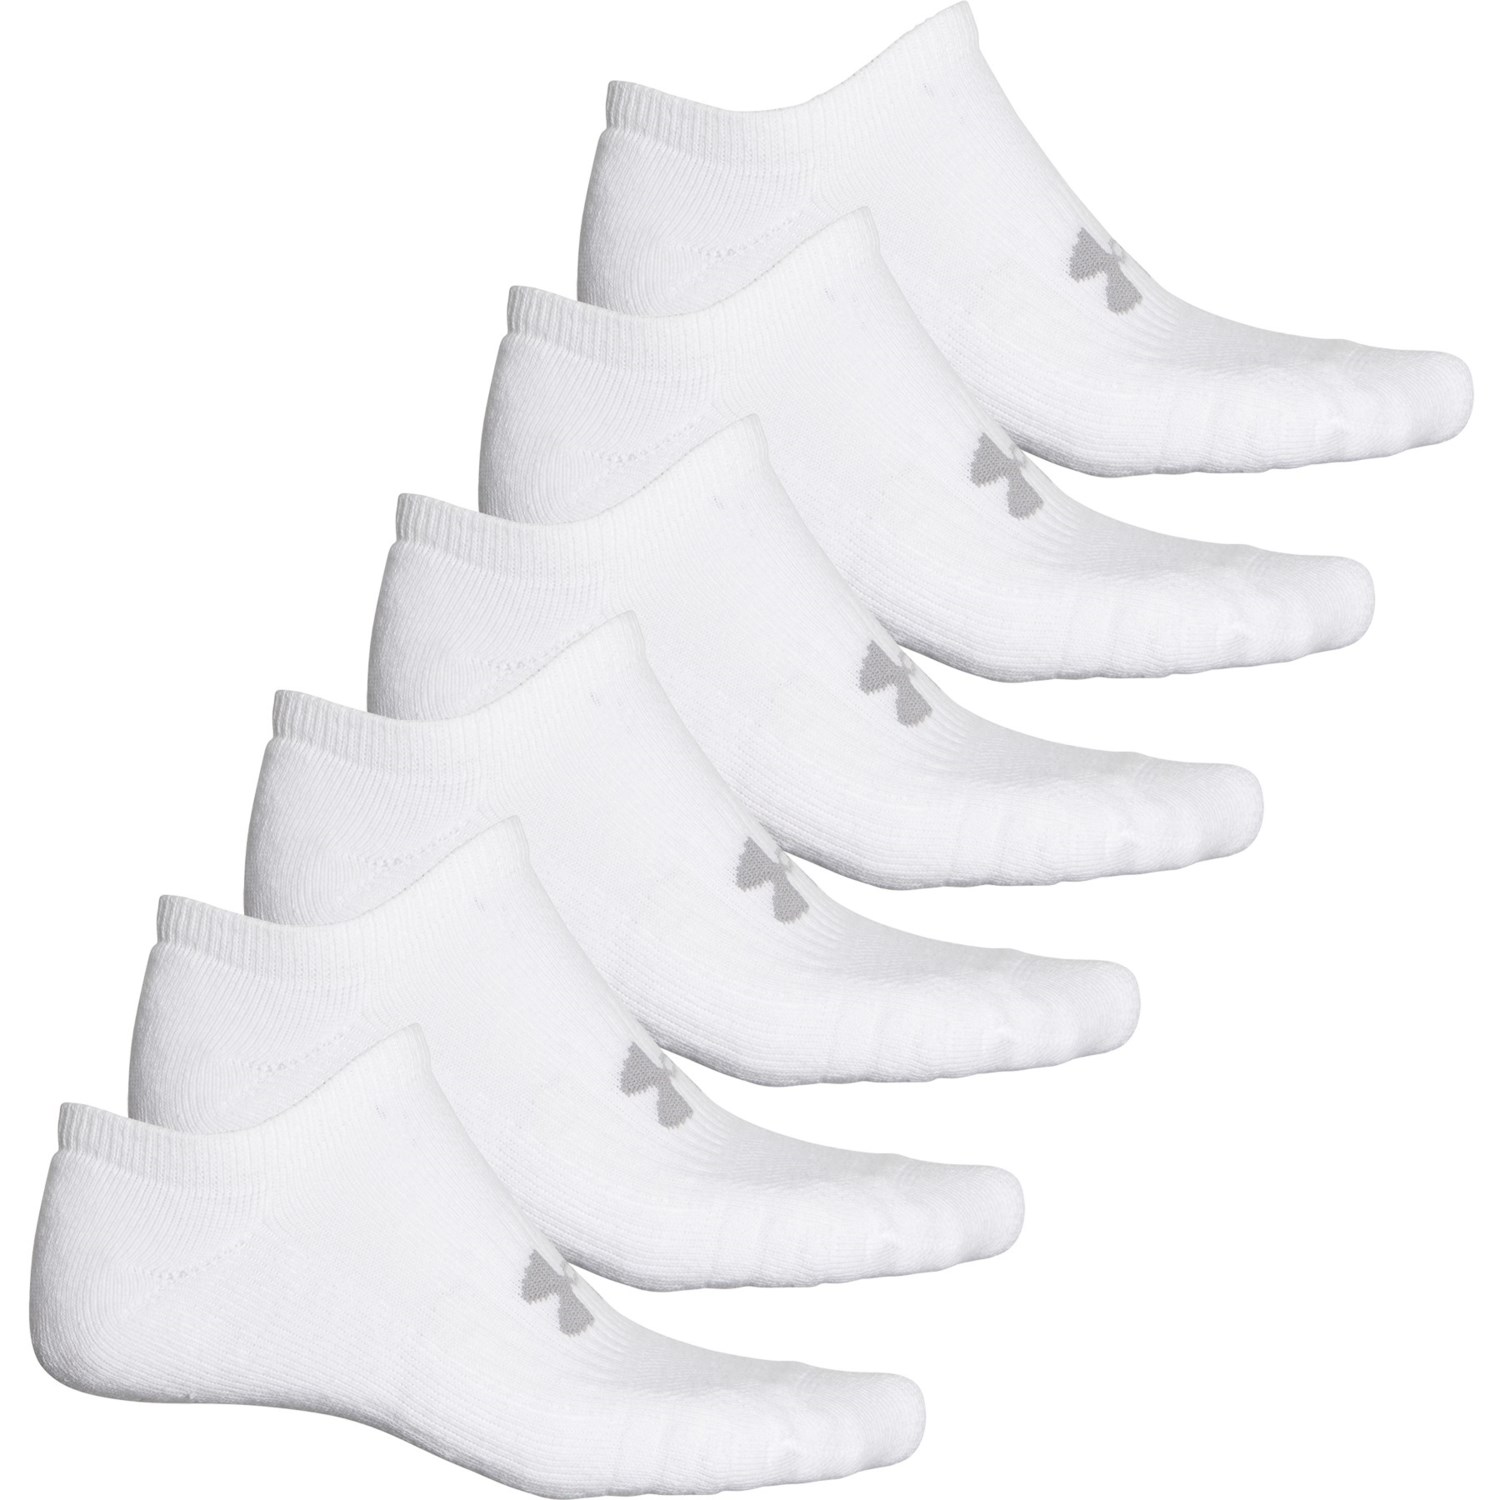 Under Armour Training Cotton No-Show Socks - 6-Pack, Below the Ankle (For Men)